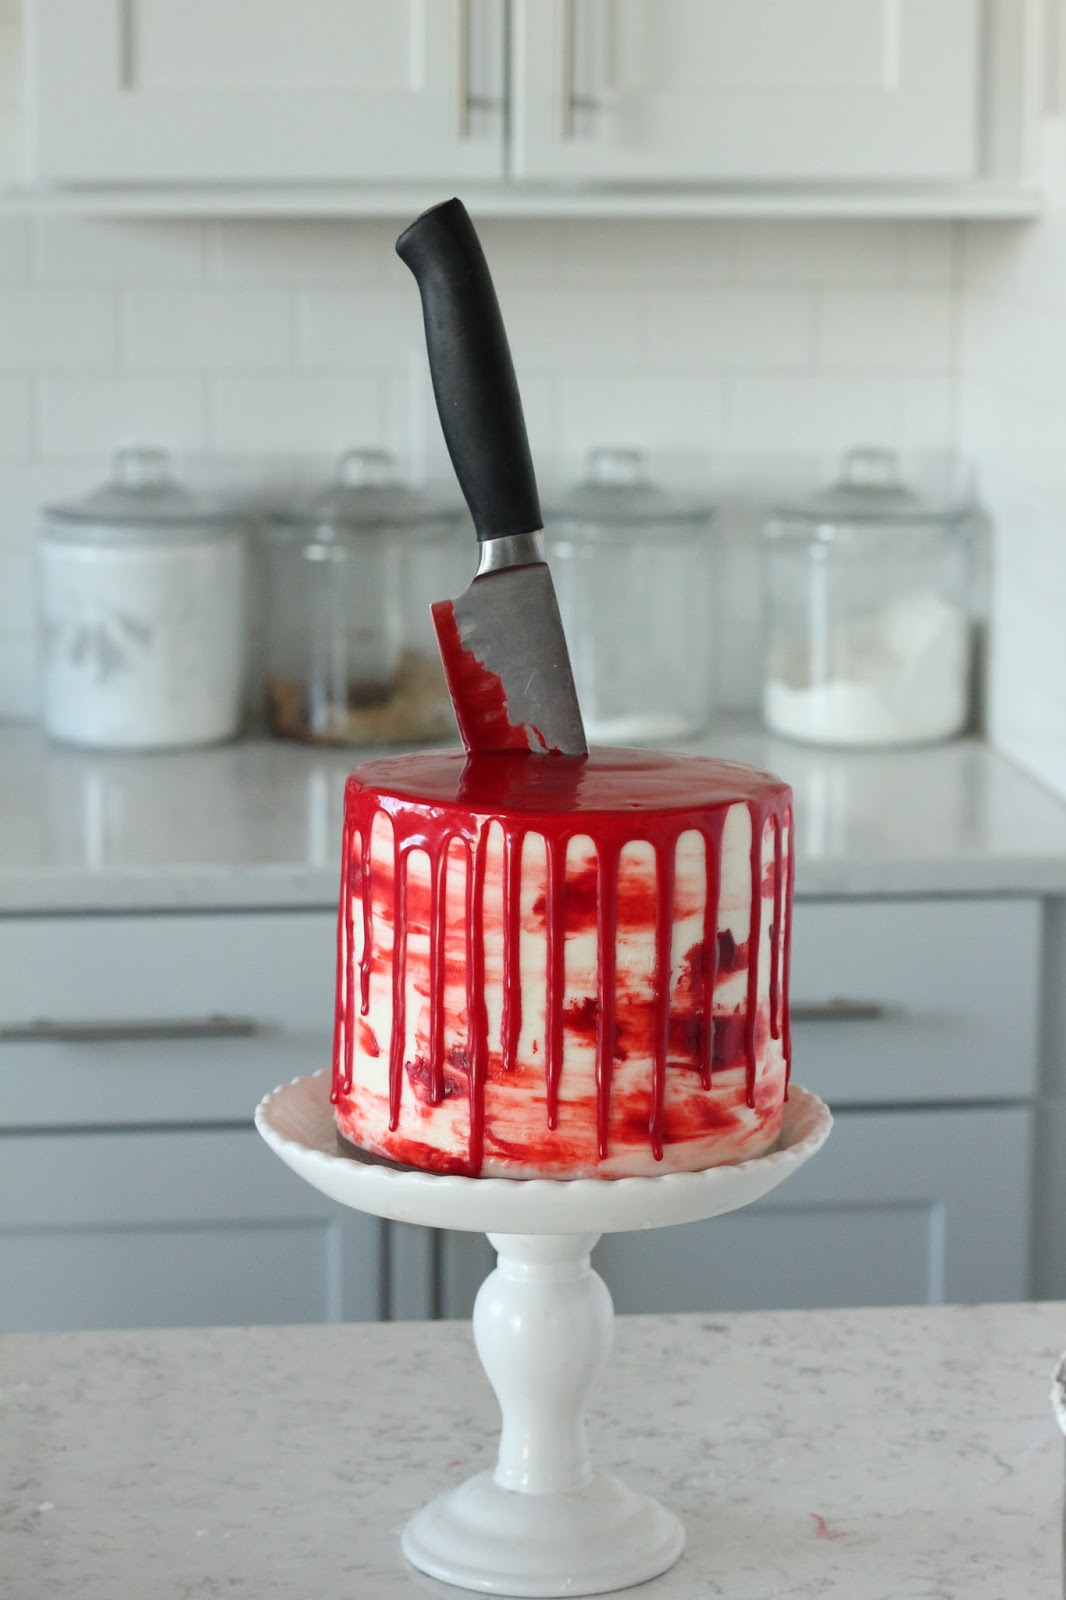 Bloody Knife (Red Velvet Cake with Almond Cream Cheese - Baking with Blondie